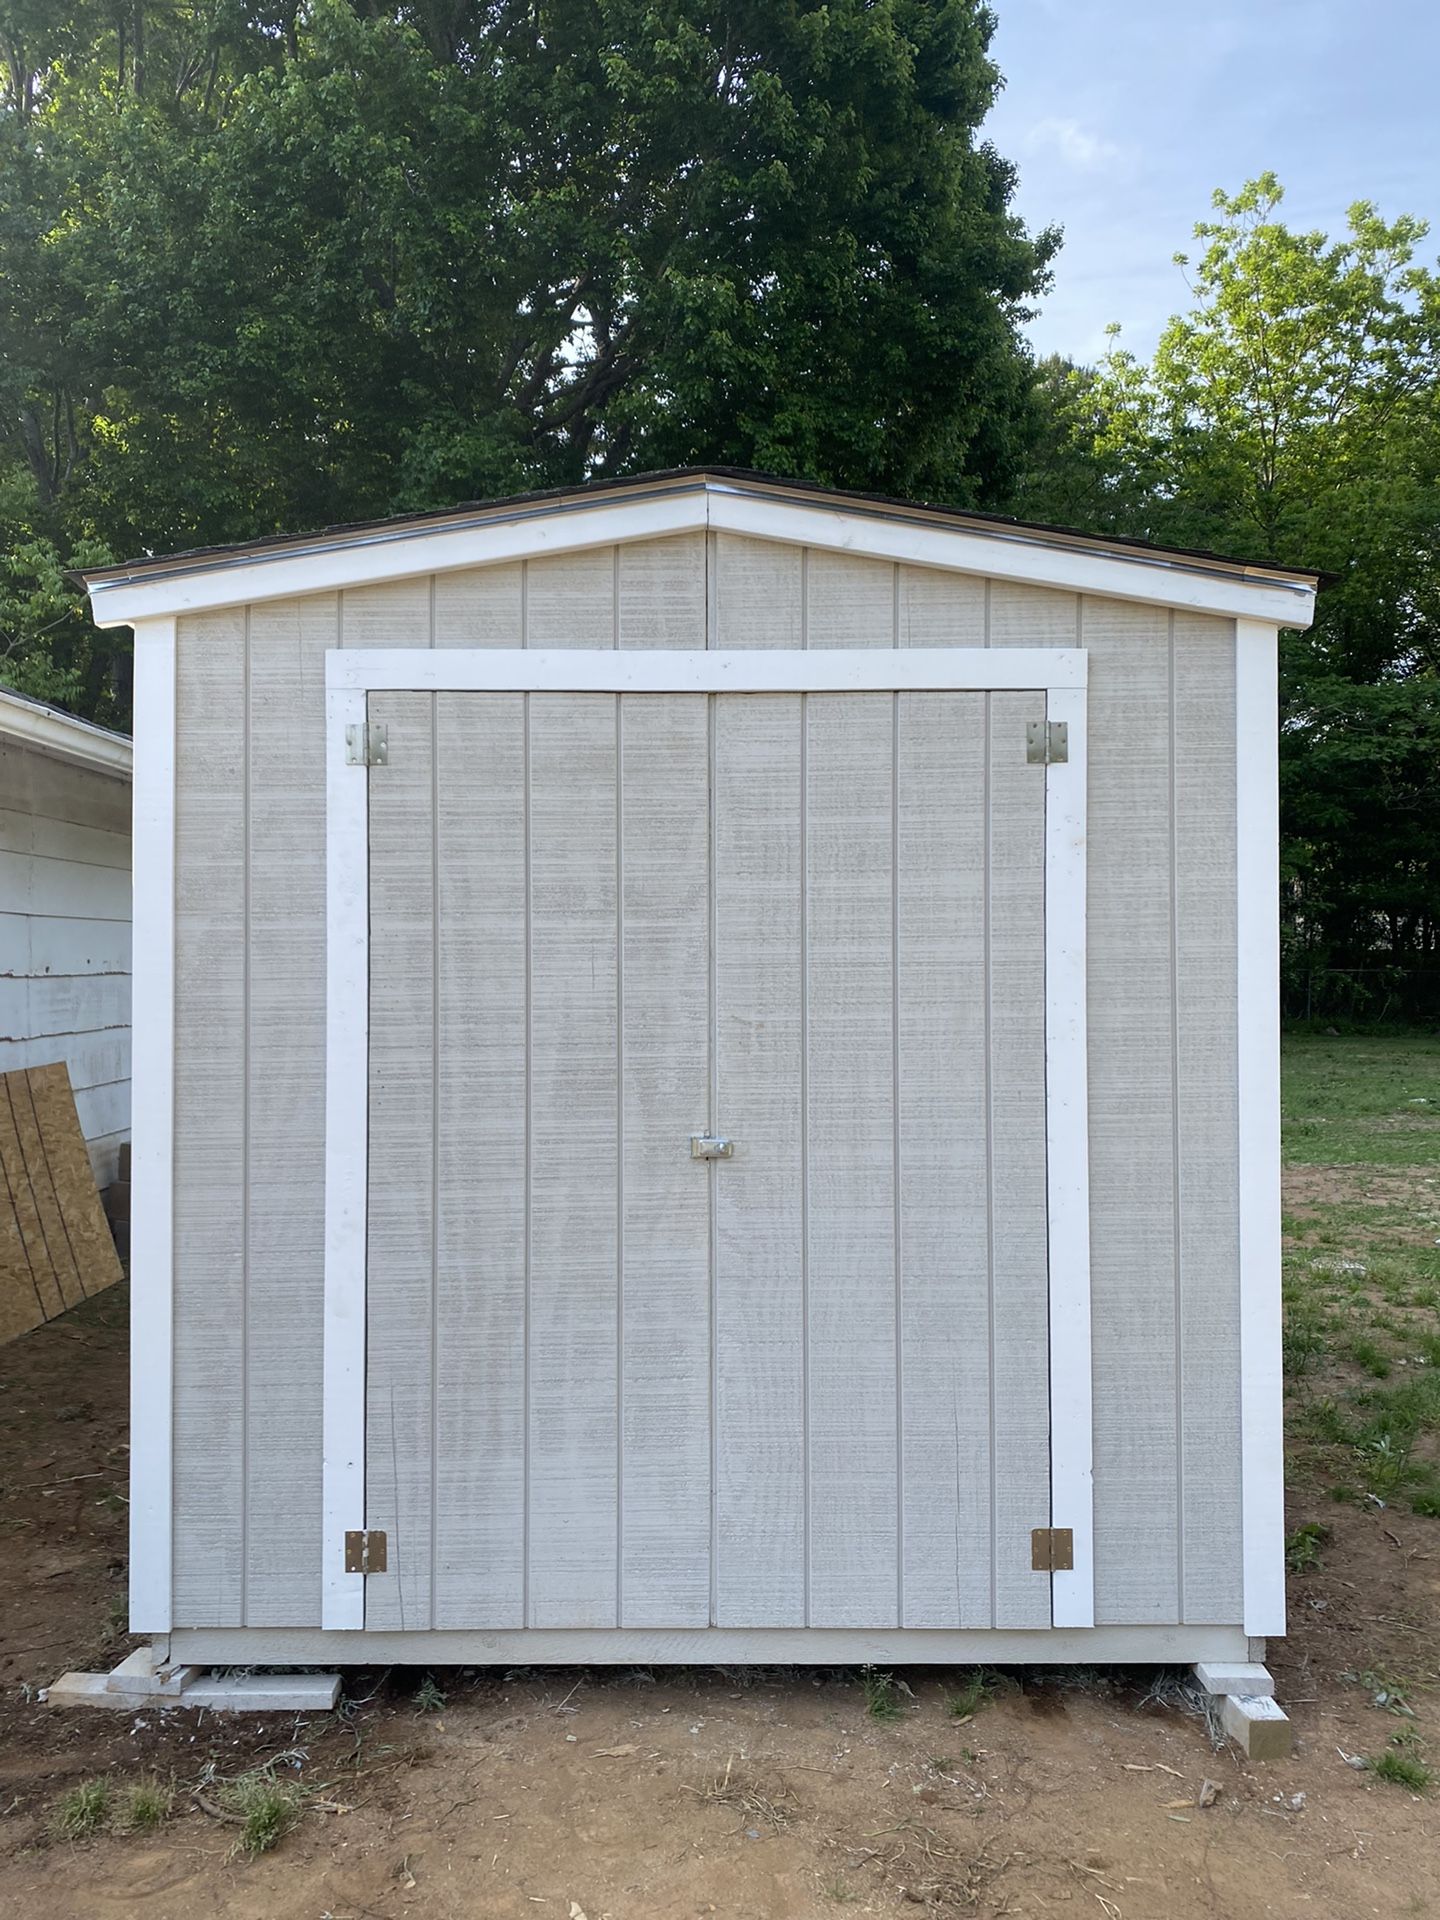 Brand New Very Well Built 8x12 Shed